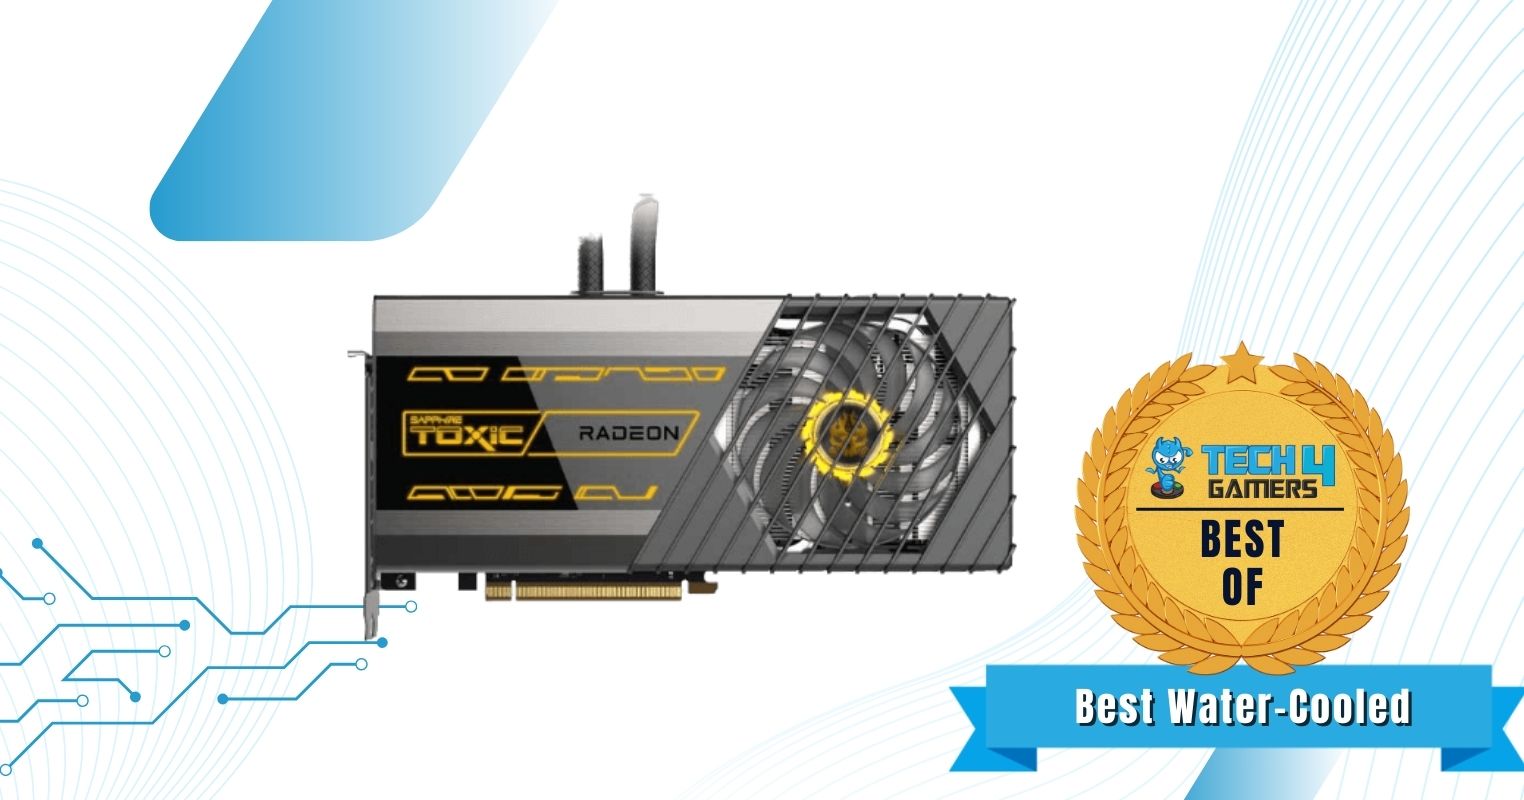 Sapphire Toxic AMD Radeon RX 6900 XT Extreme Edition - Best Water-Cooled RX 6900 XT